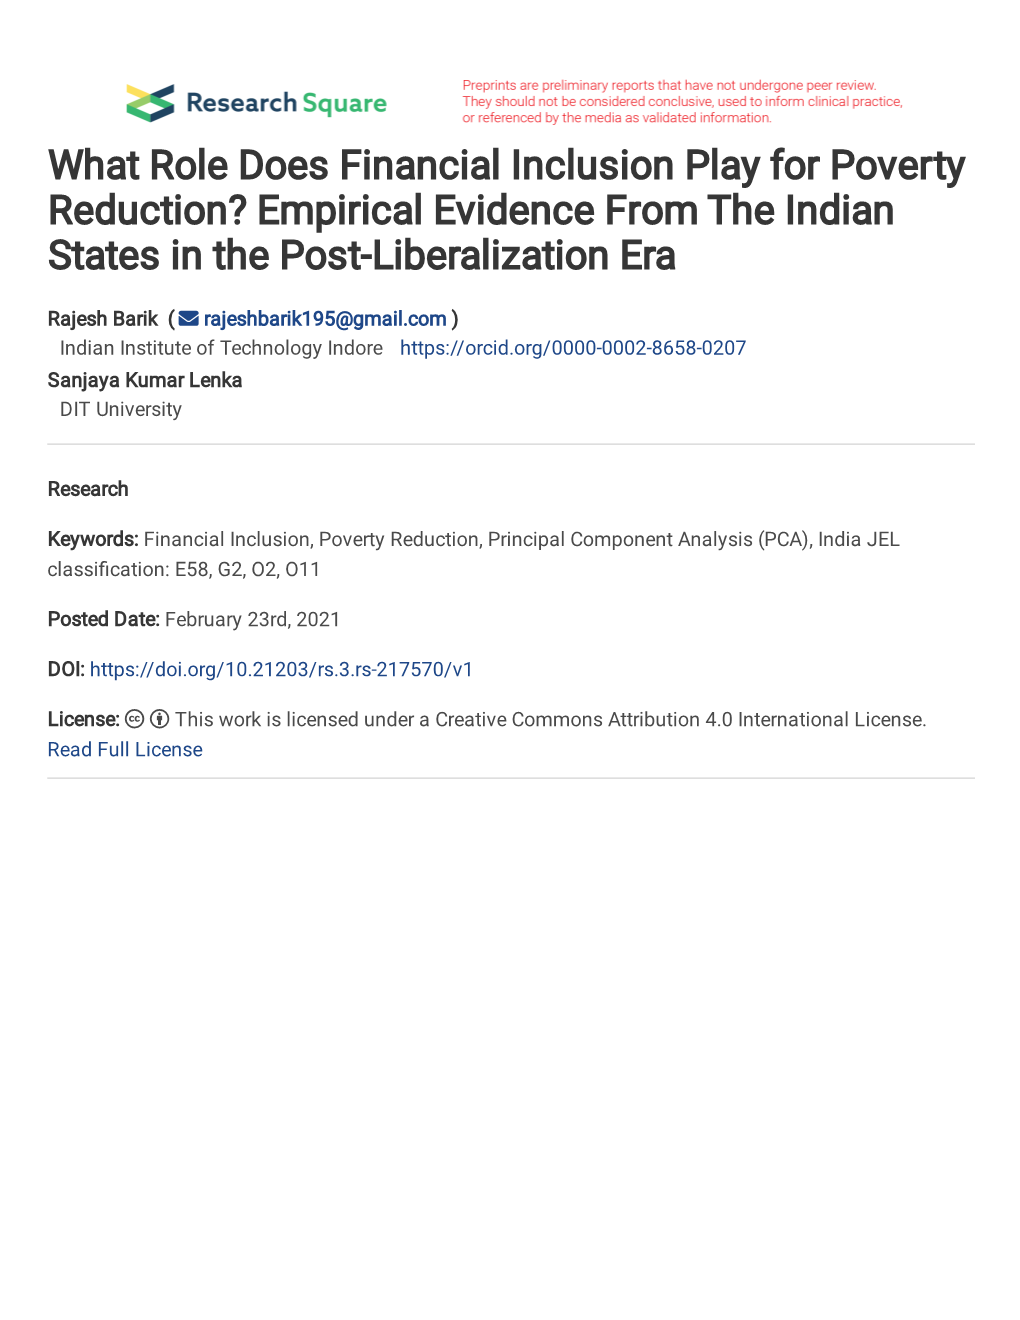 What Role Does Financial Inclusion Play for Poverty Reduction? Empirical Evidence from the Indian States in the Post-Liberalization Era